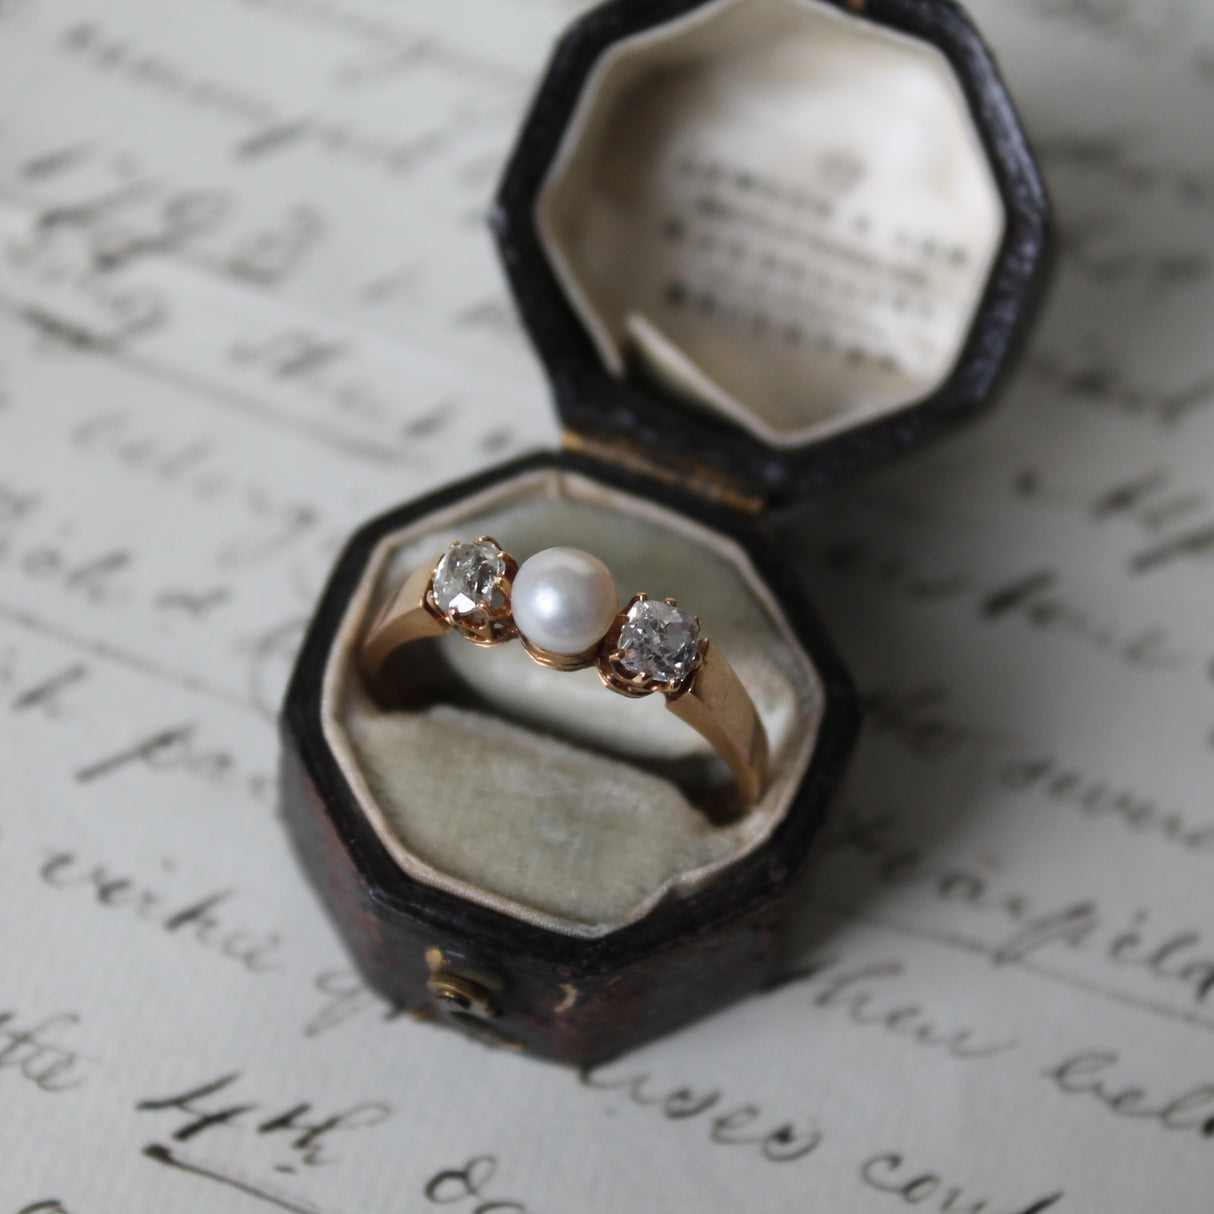 Antique Engagement Rings | Antique Ring Boutique | Vintage Engagement Rings | Antique Engagement Rings | Antique Jewellery company | Vintage Jewellery Edwardian, French, 18ct Gold, Natural Pearl and Diamond Ring